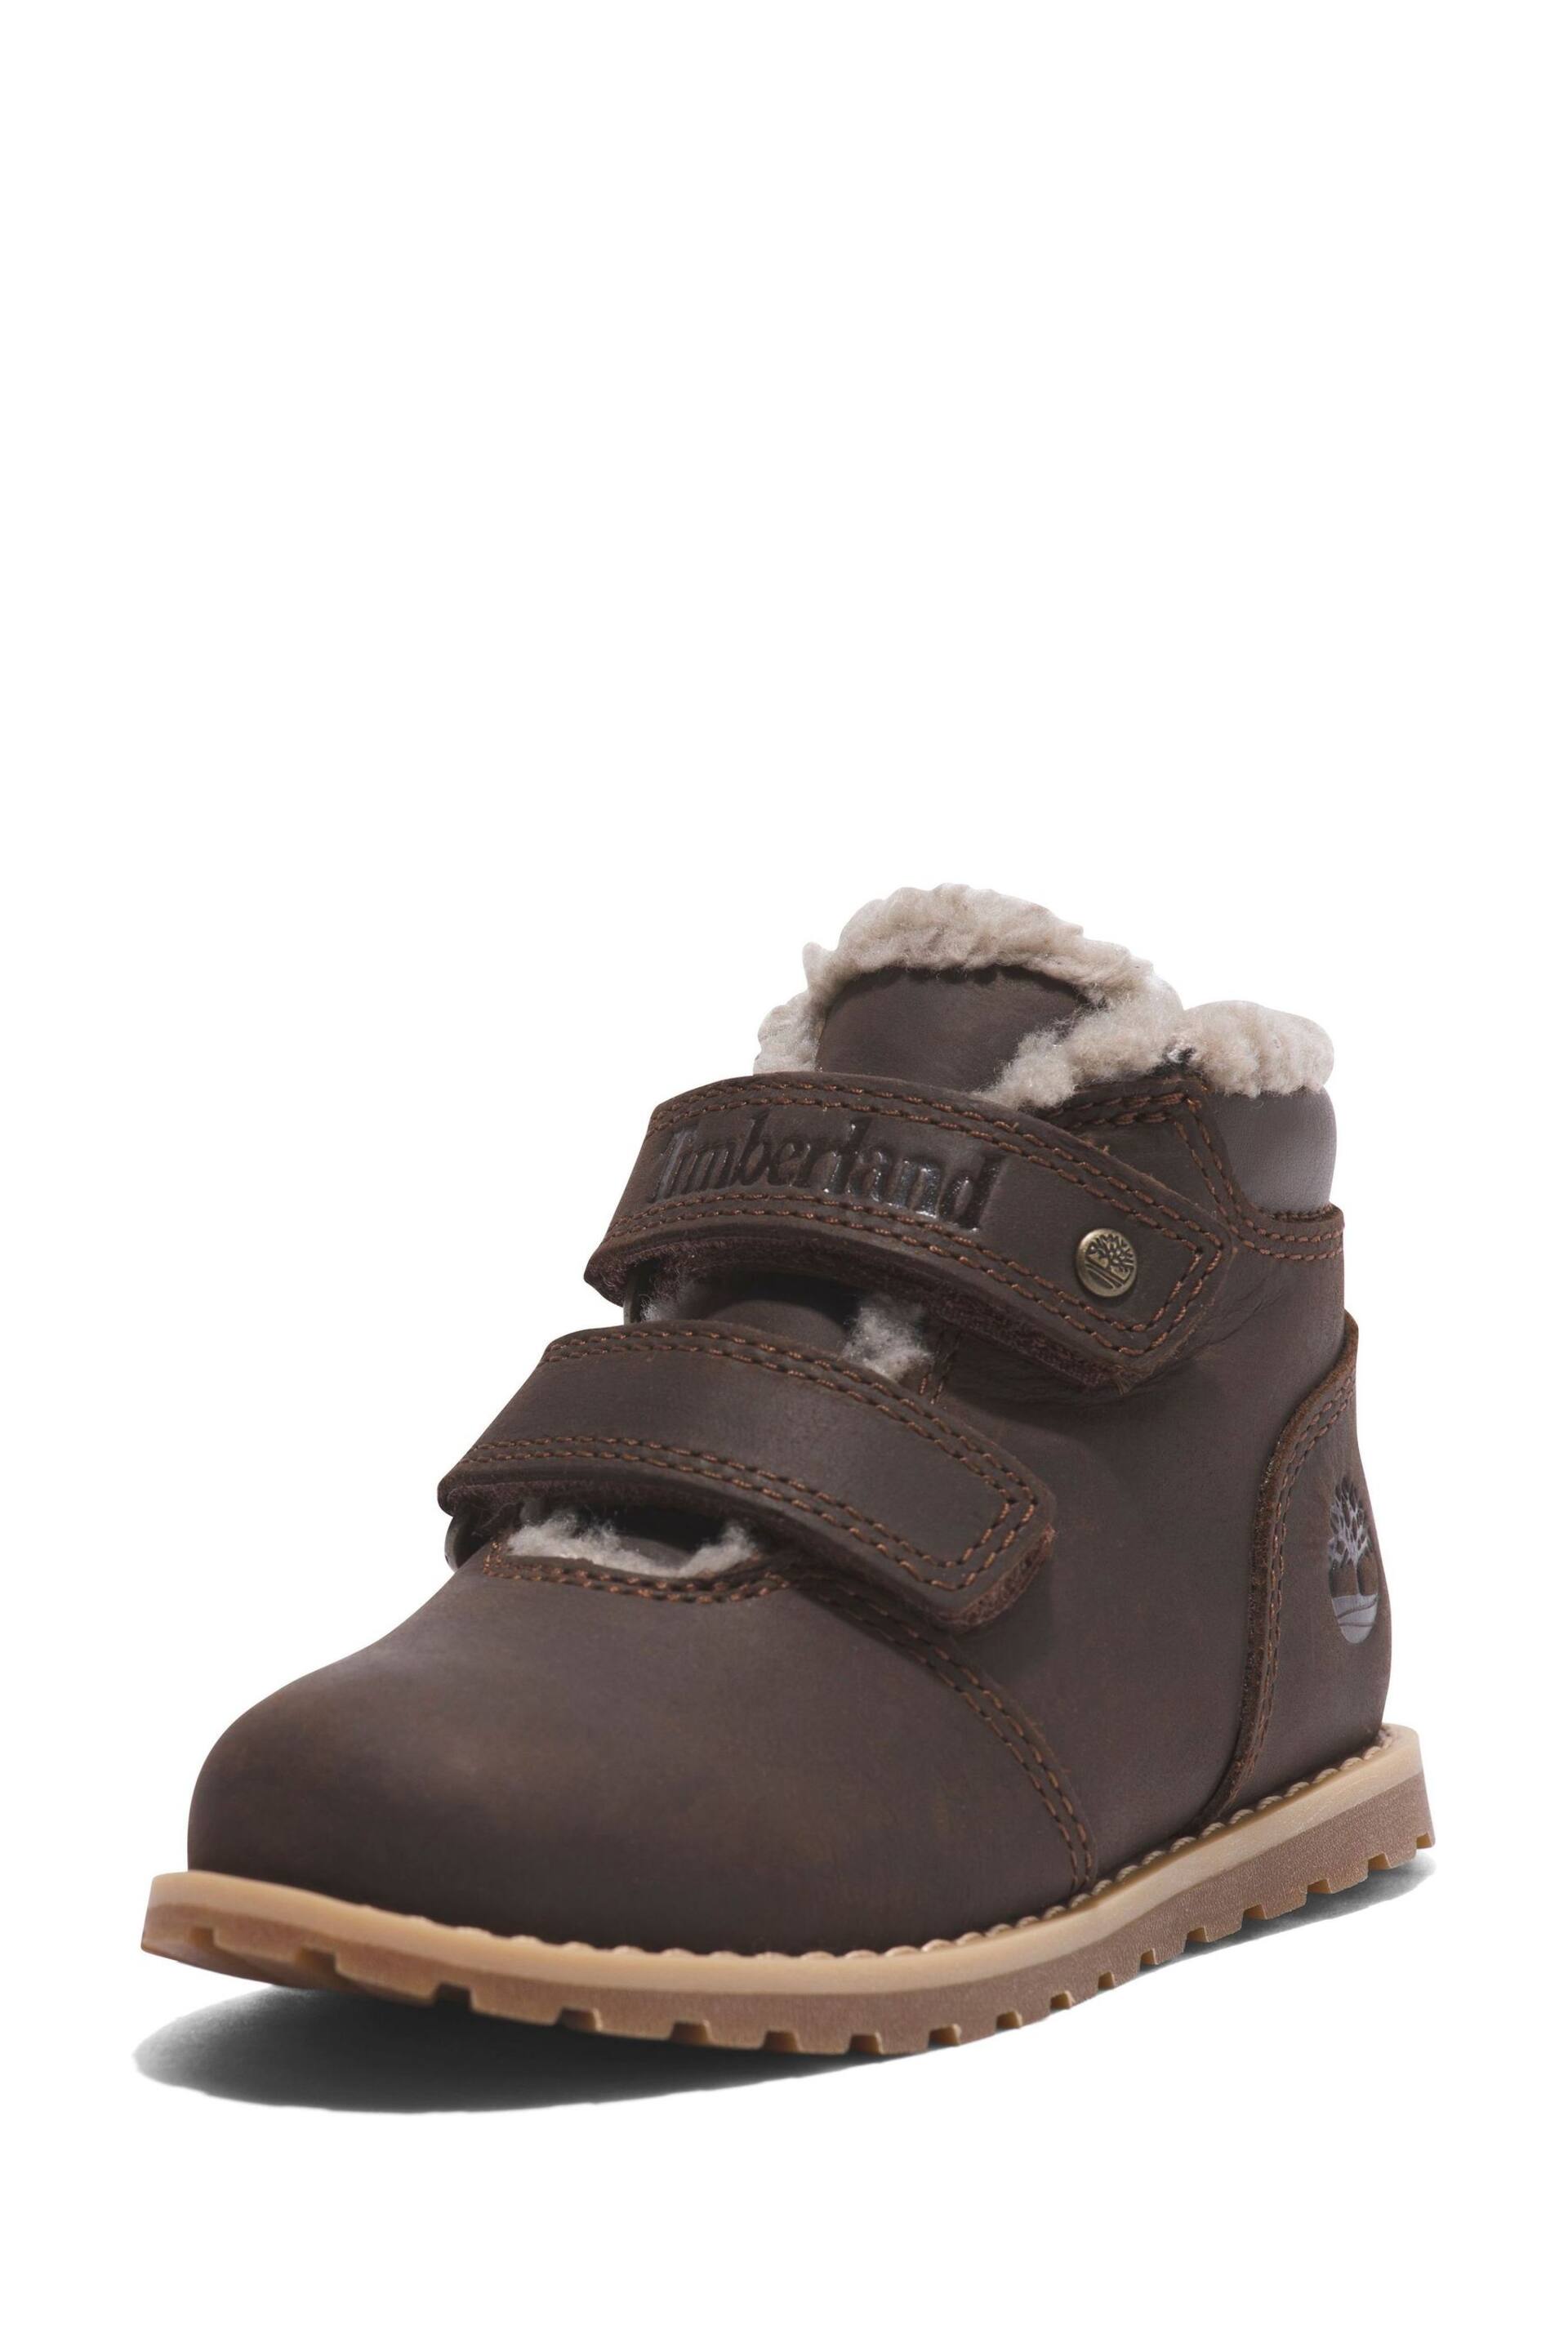 Timberland Pokey Pine Warm Lined Hook and Loop Boots - Image 2 of 4